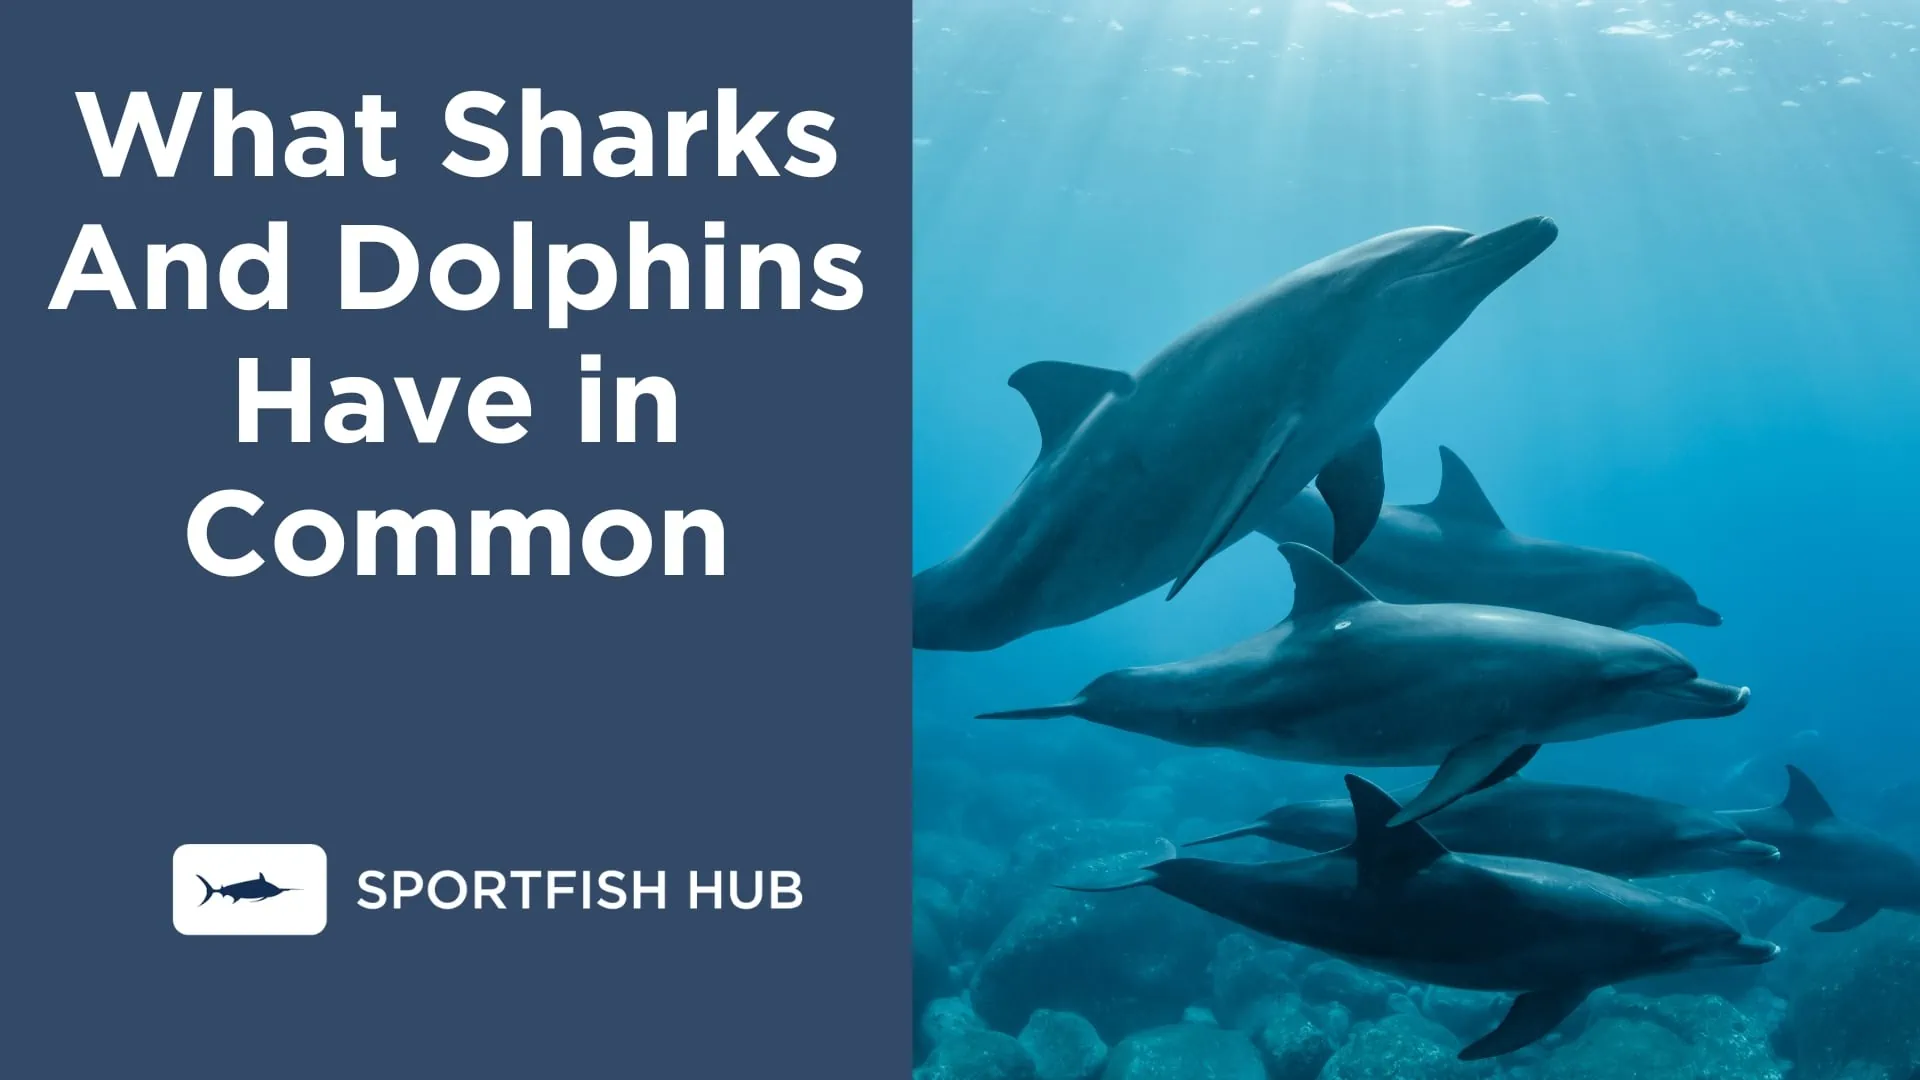 What Sharks And Dolphins Have in Common